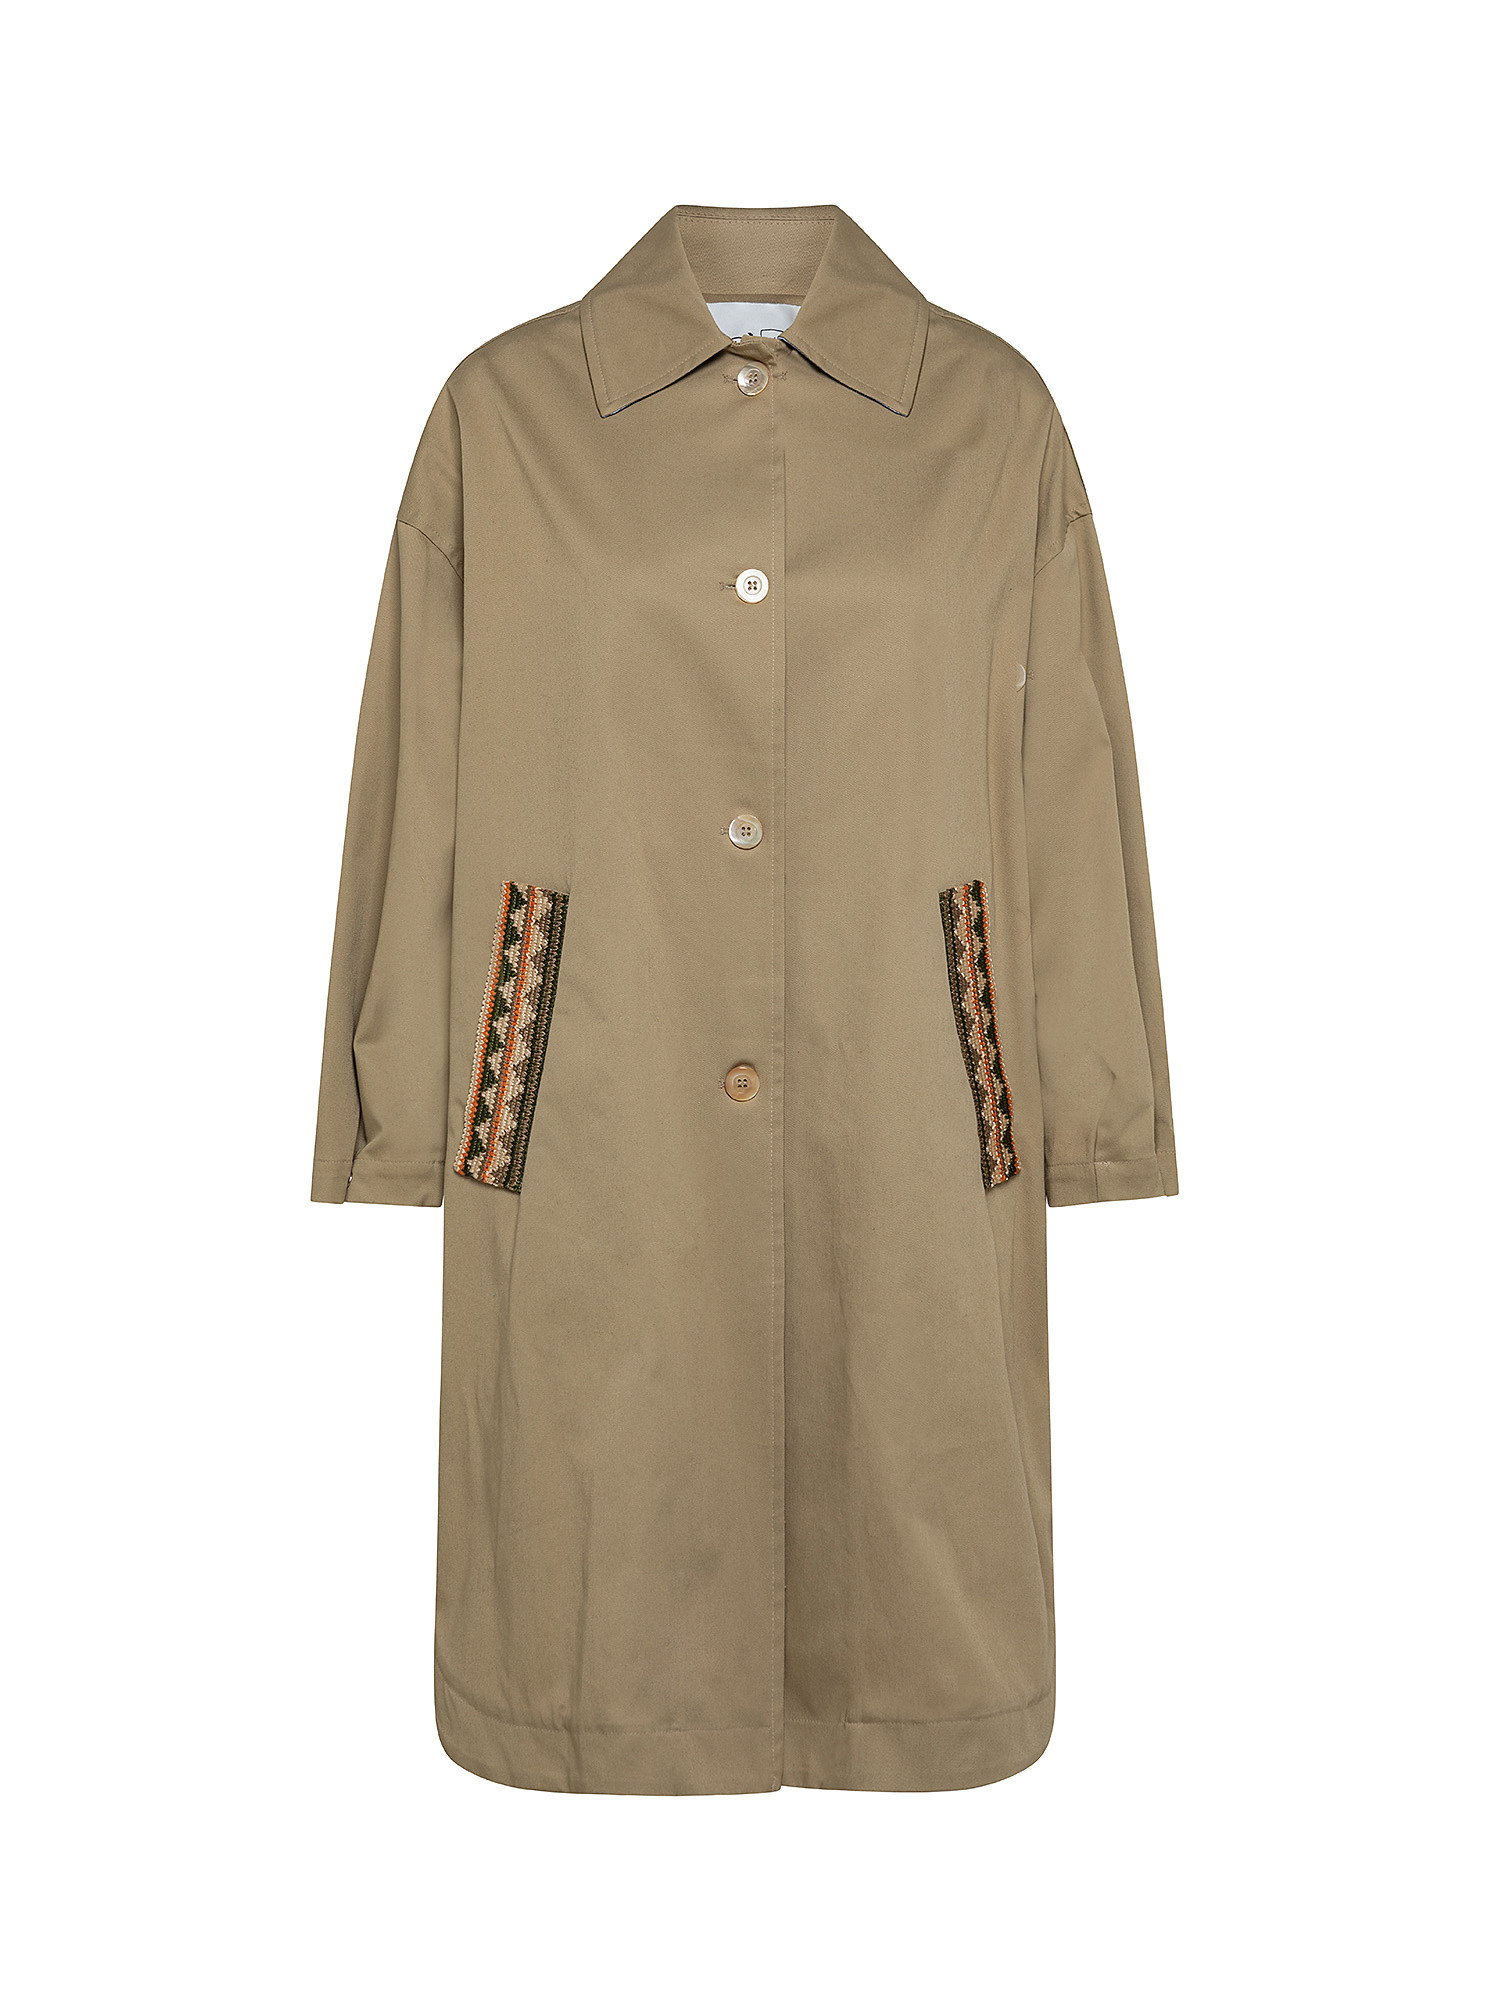 Trench con passamaneria etnica, Beige, large image number 0